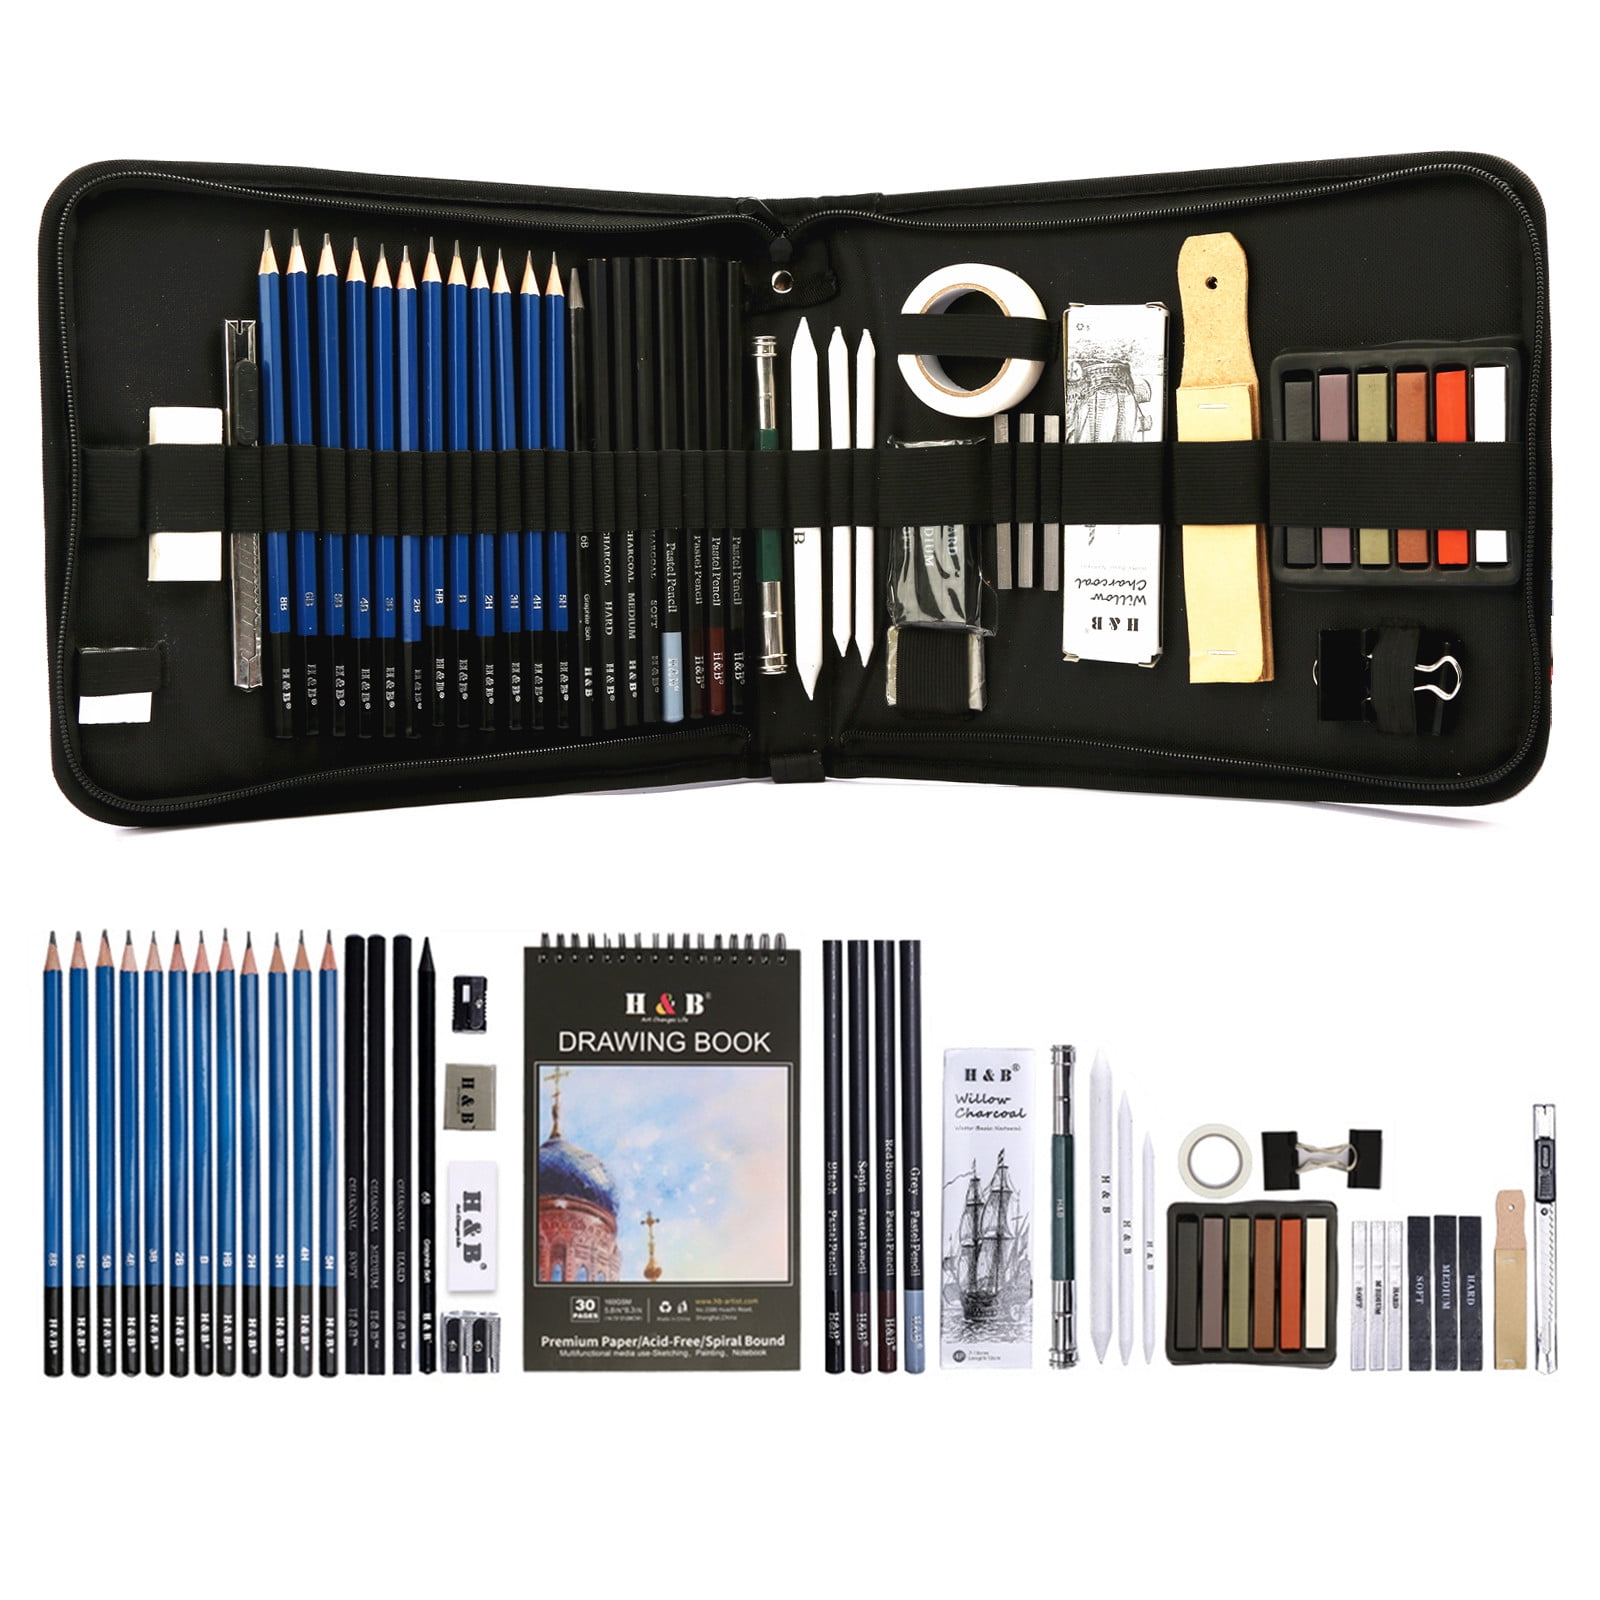 33 Pieces Pro Drawing Kit Sketching Pencils Set,Portable Zippered Travel  Case | eBay